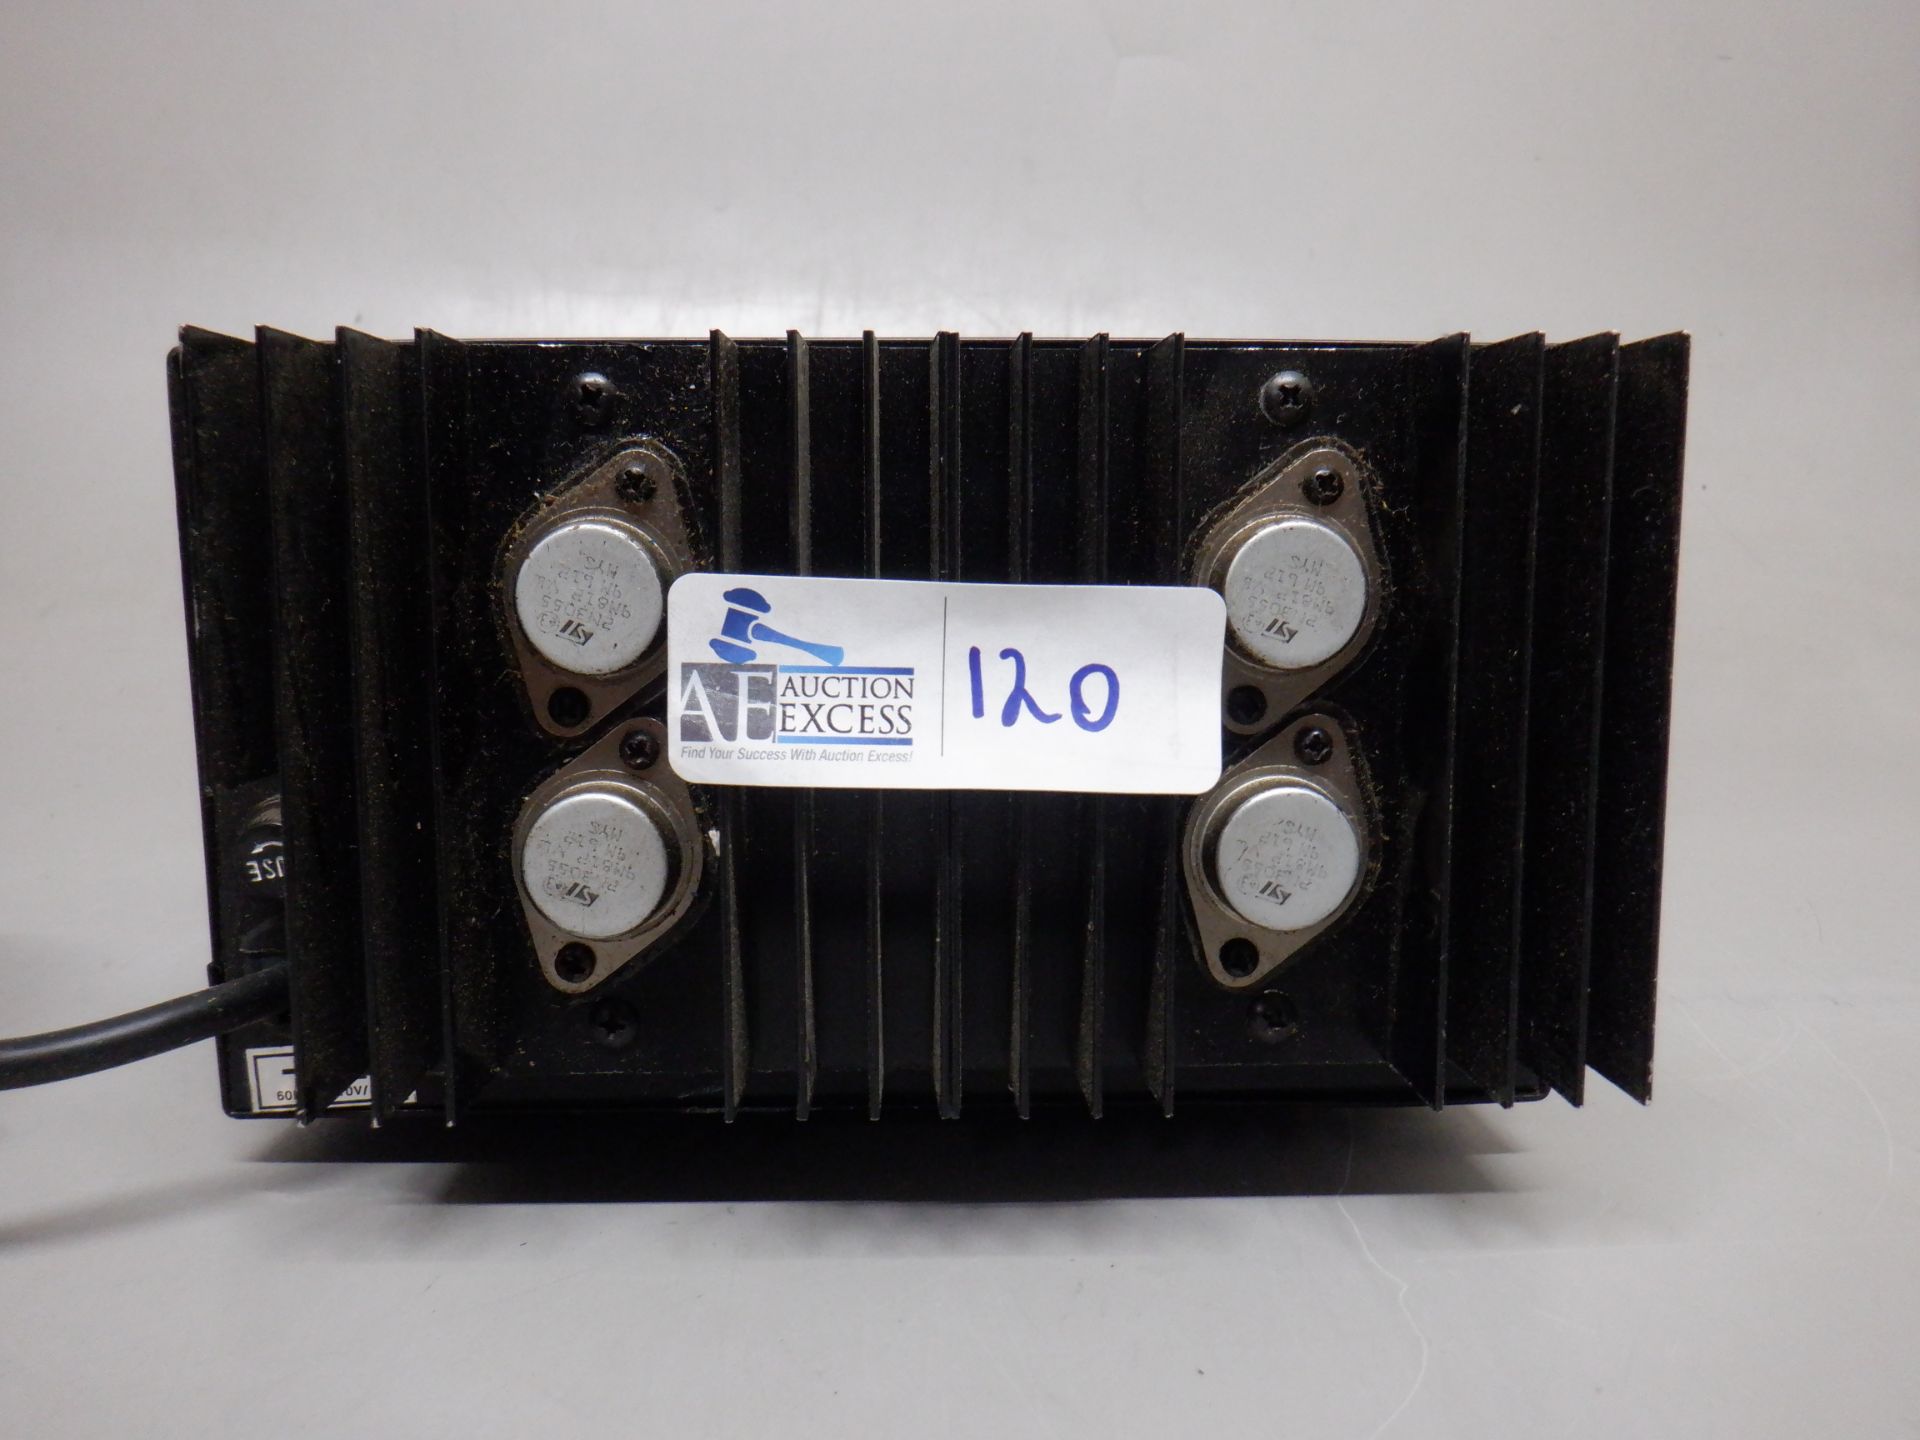 SKY REGULATED DC POWER SUPPLY PS-20R - Image 2 of 2